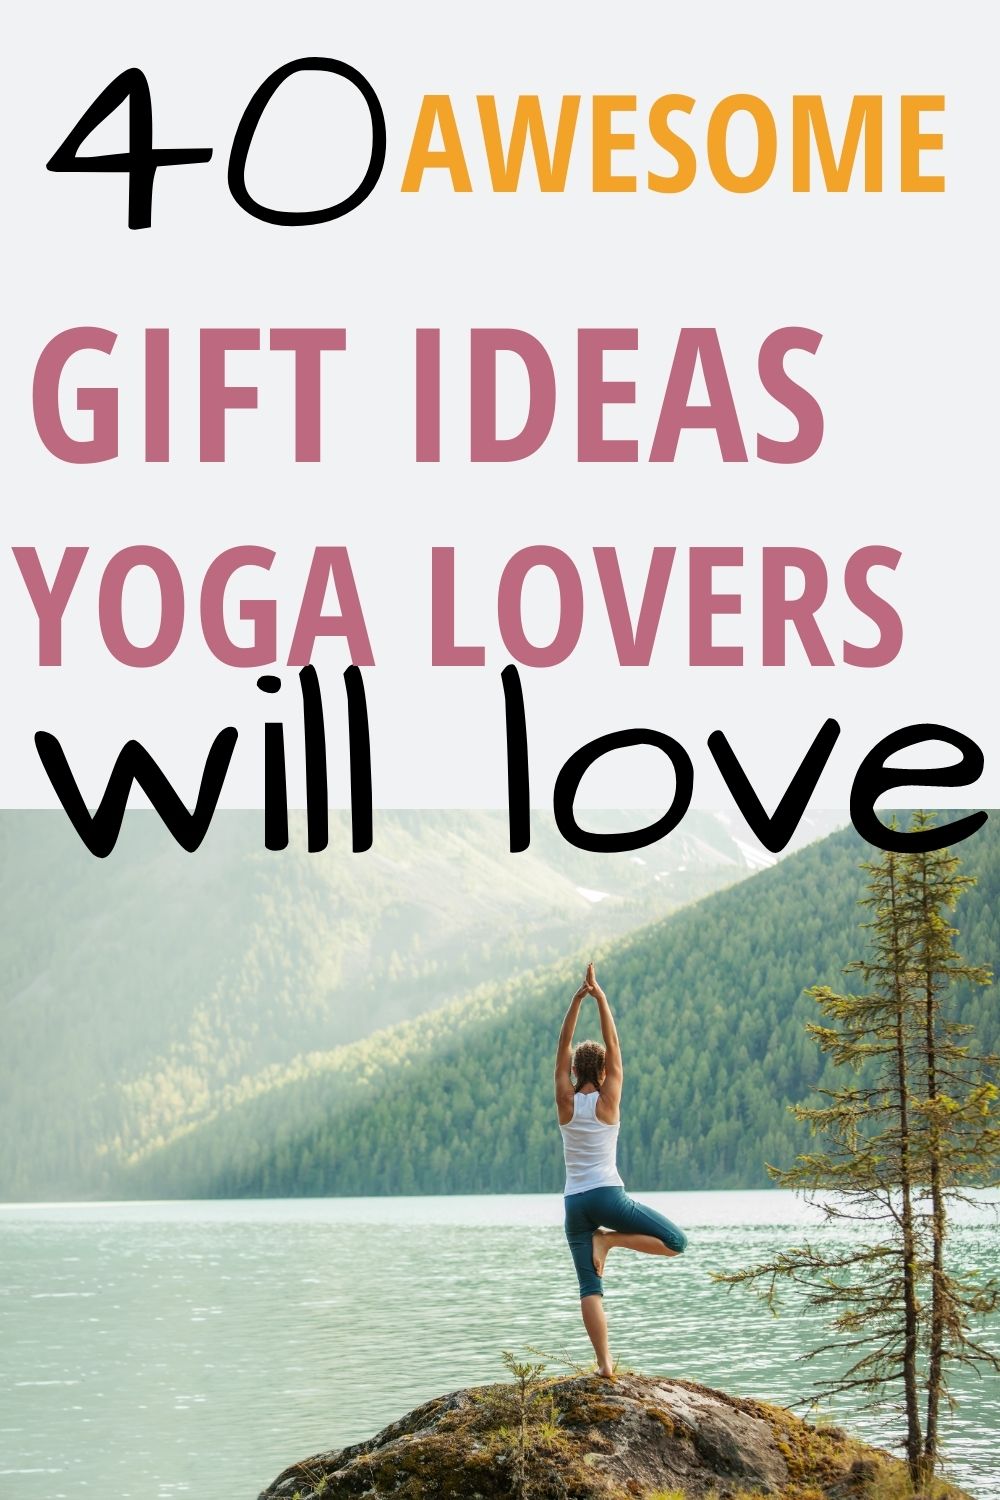 Gifts for yoga lovers